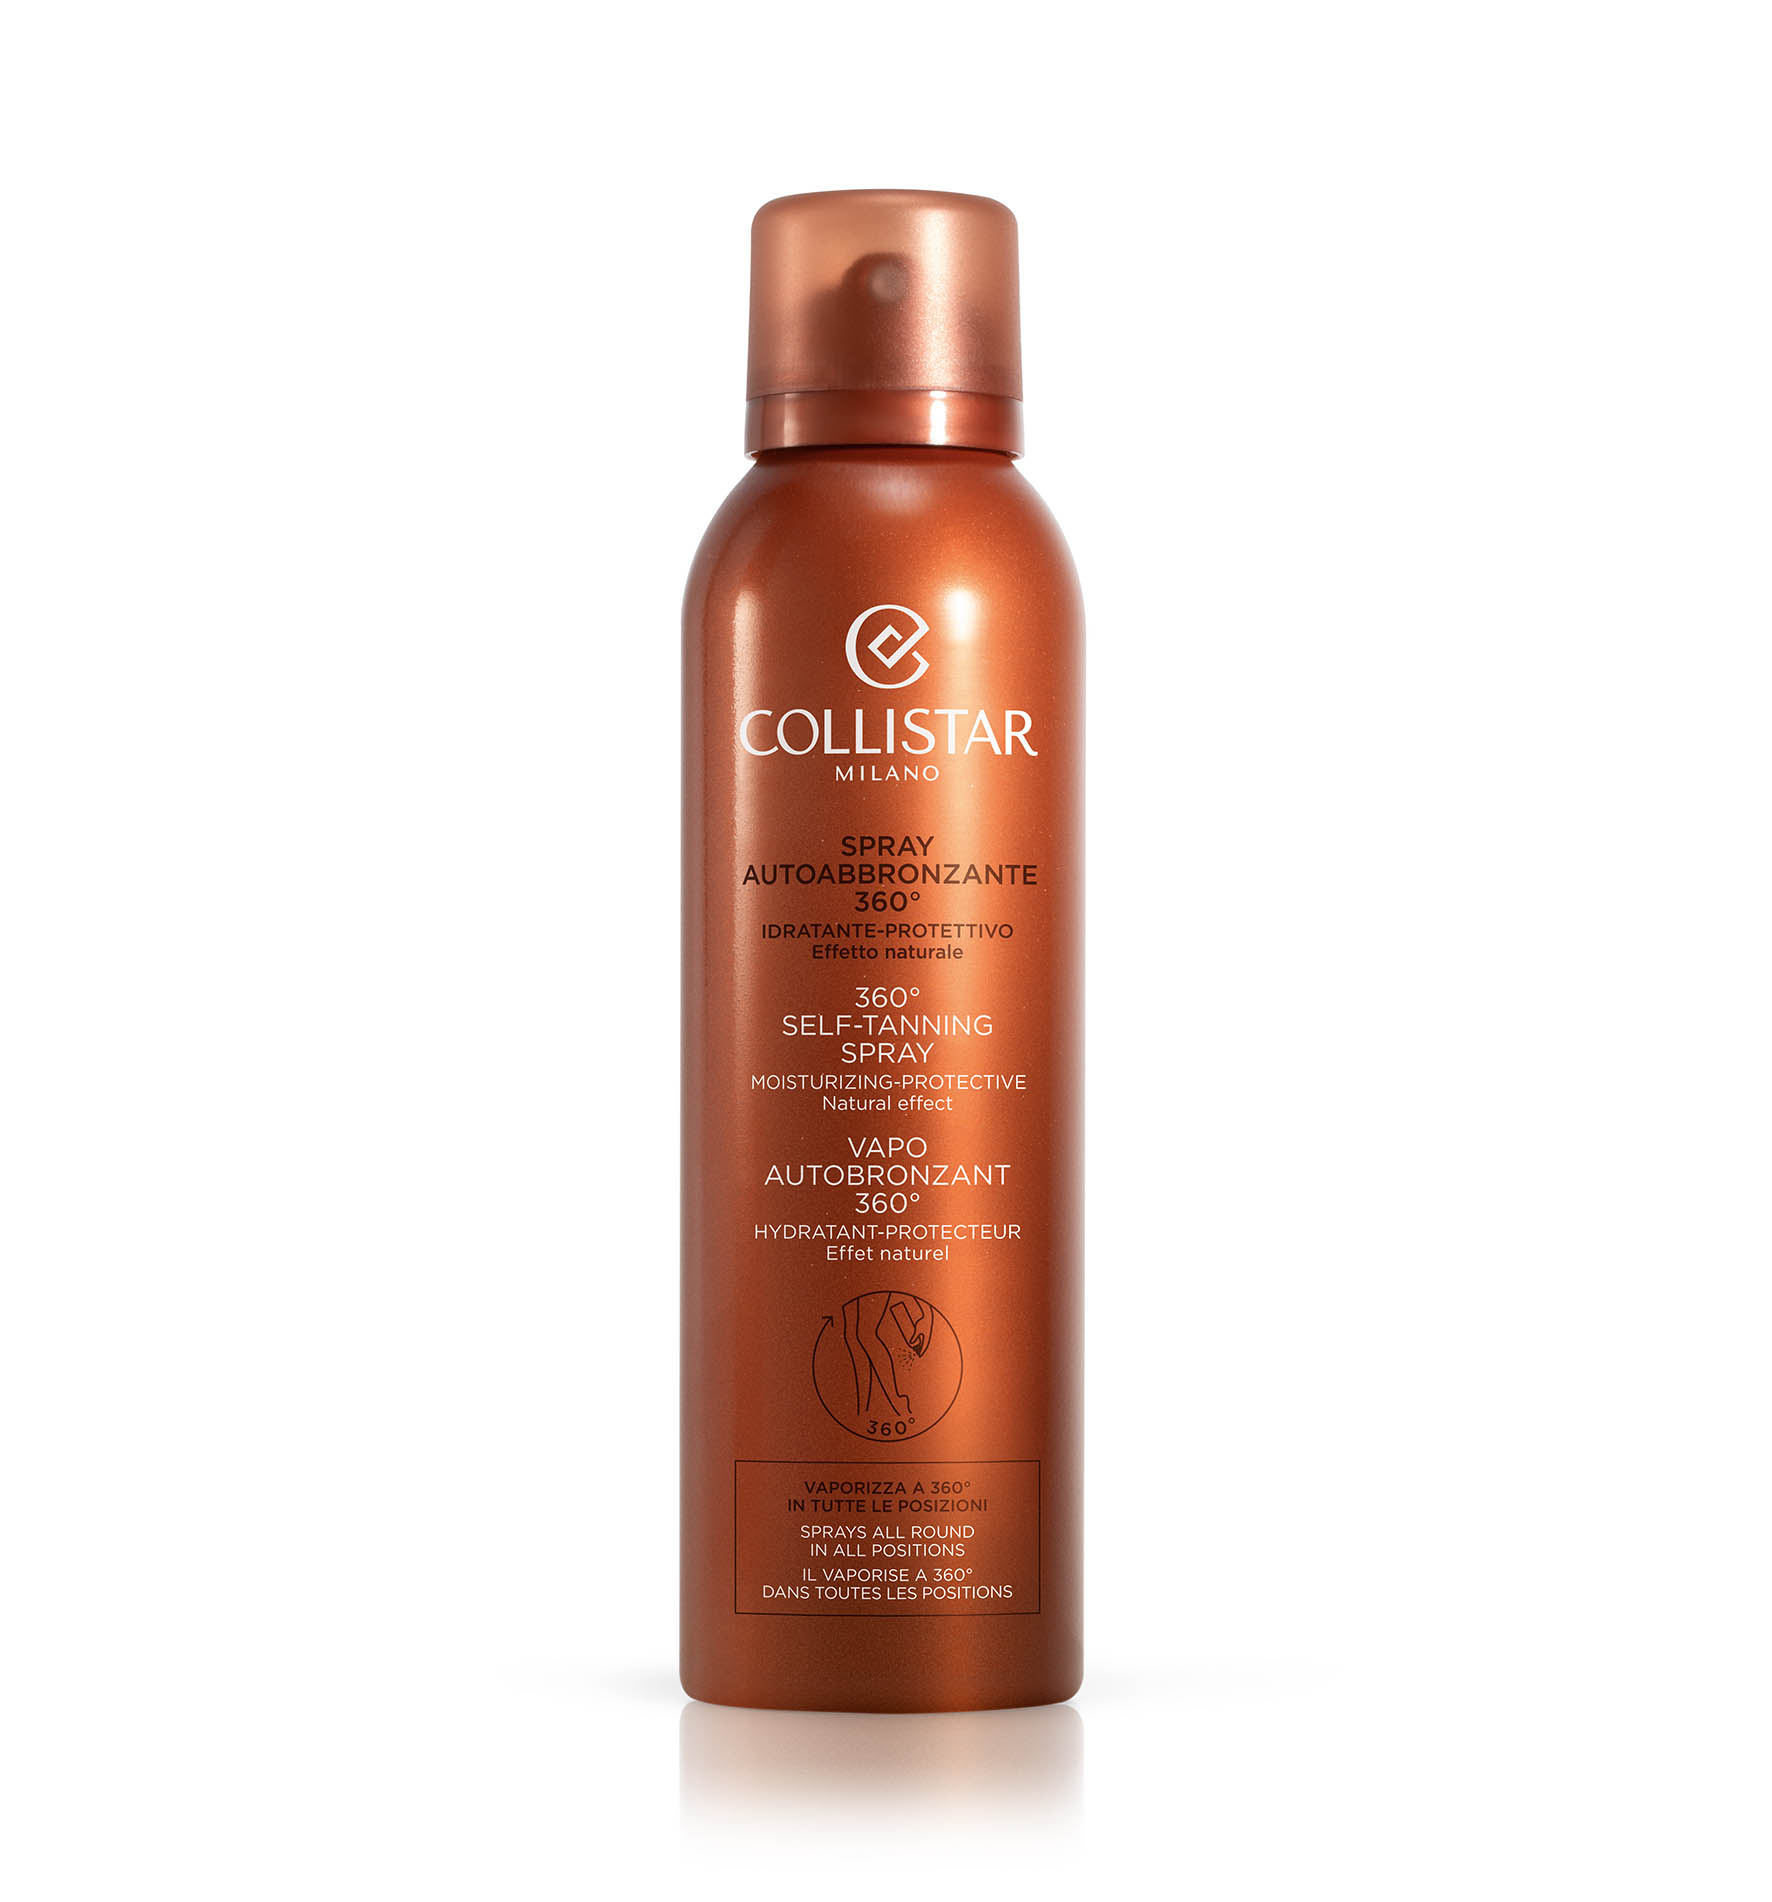 360° SELF-TANNING SPRAY - SELF-TANNERS | Collistar - Shop Online Ufficiale